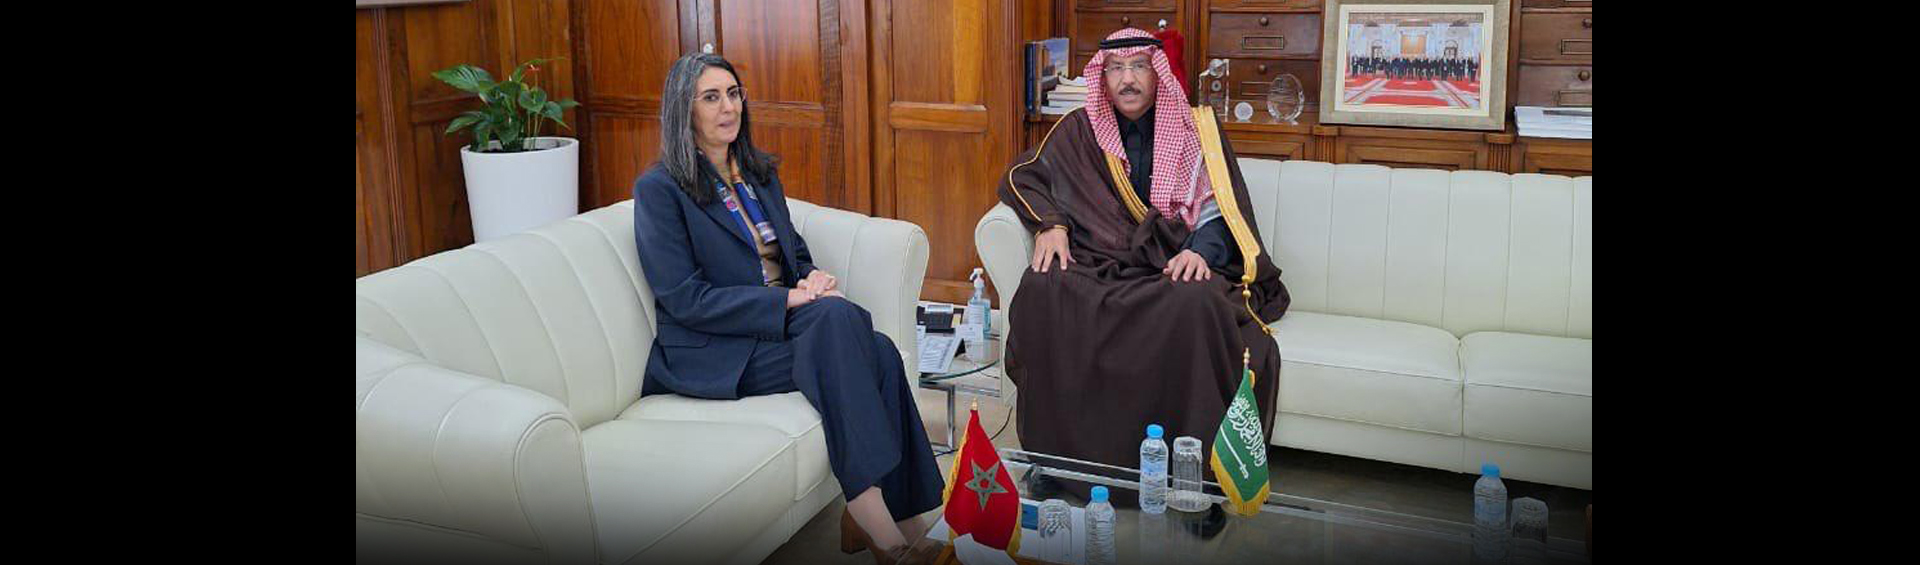 The Minister of Economy and Finance receives his excellency Dr. Sami bin Abdullah bin Othman Al-Saleh, Ambassador extraordinary and plenipotentiary of the kingdom of Saudi Arabia to Morocco